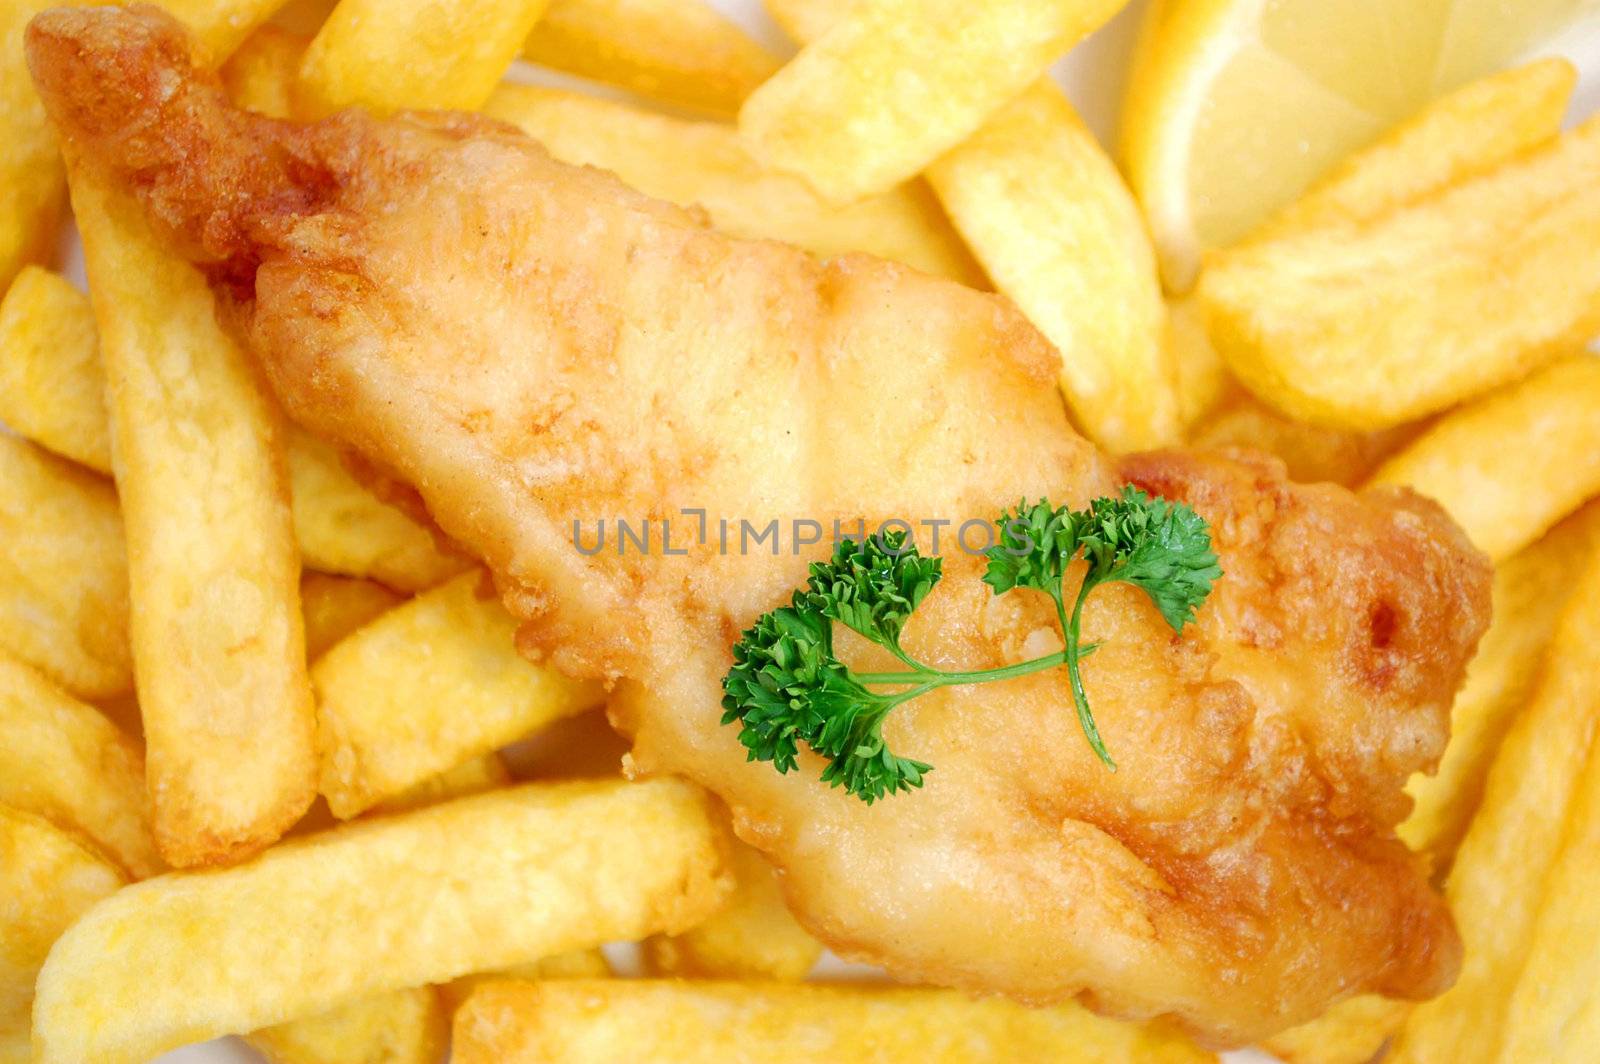 Fish and chips takeaway meal